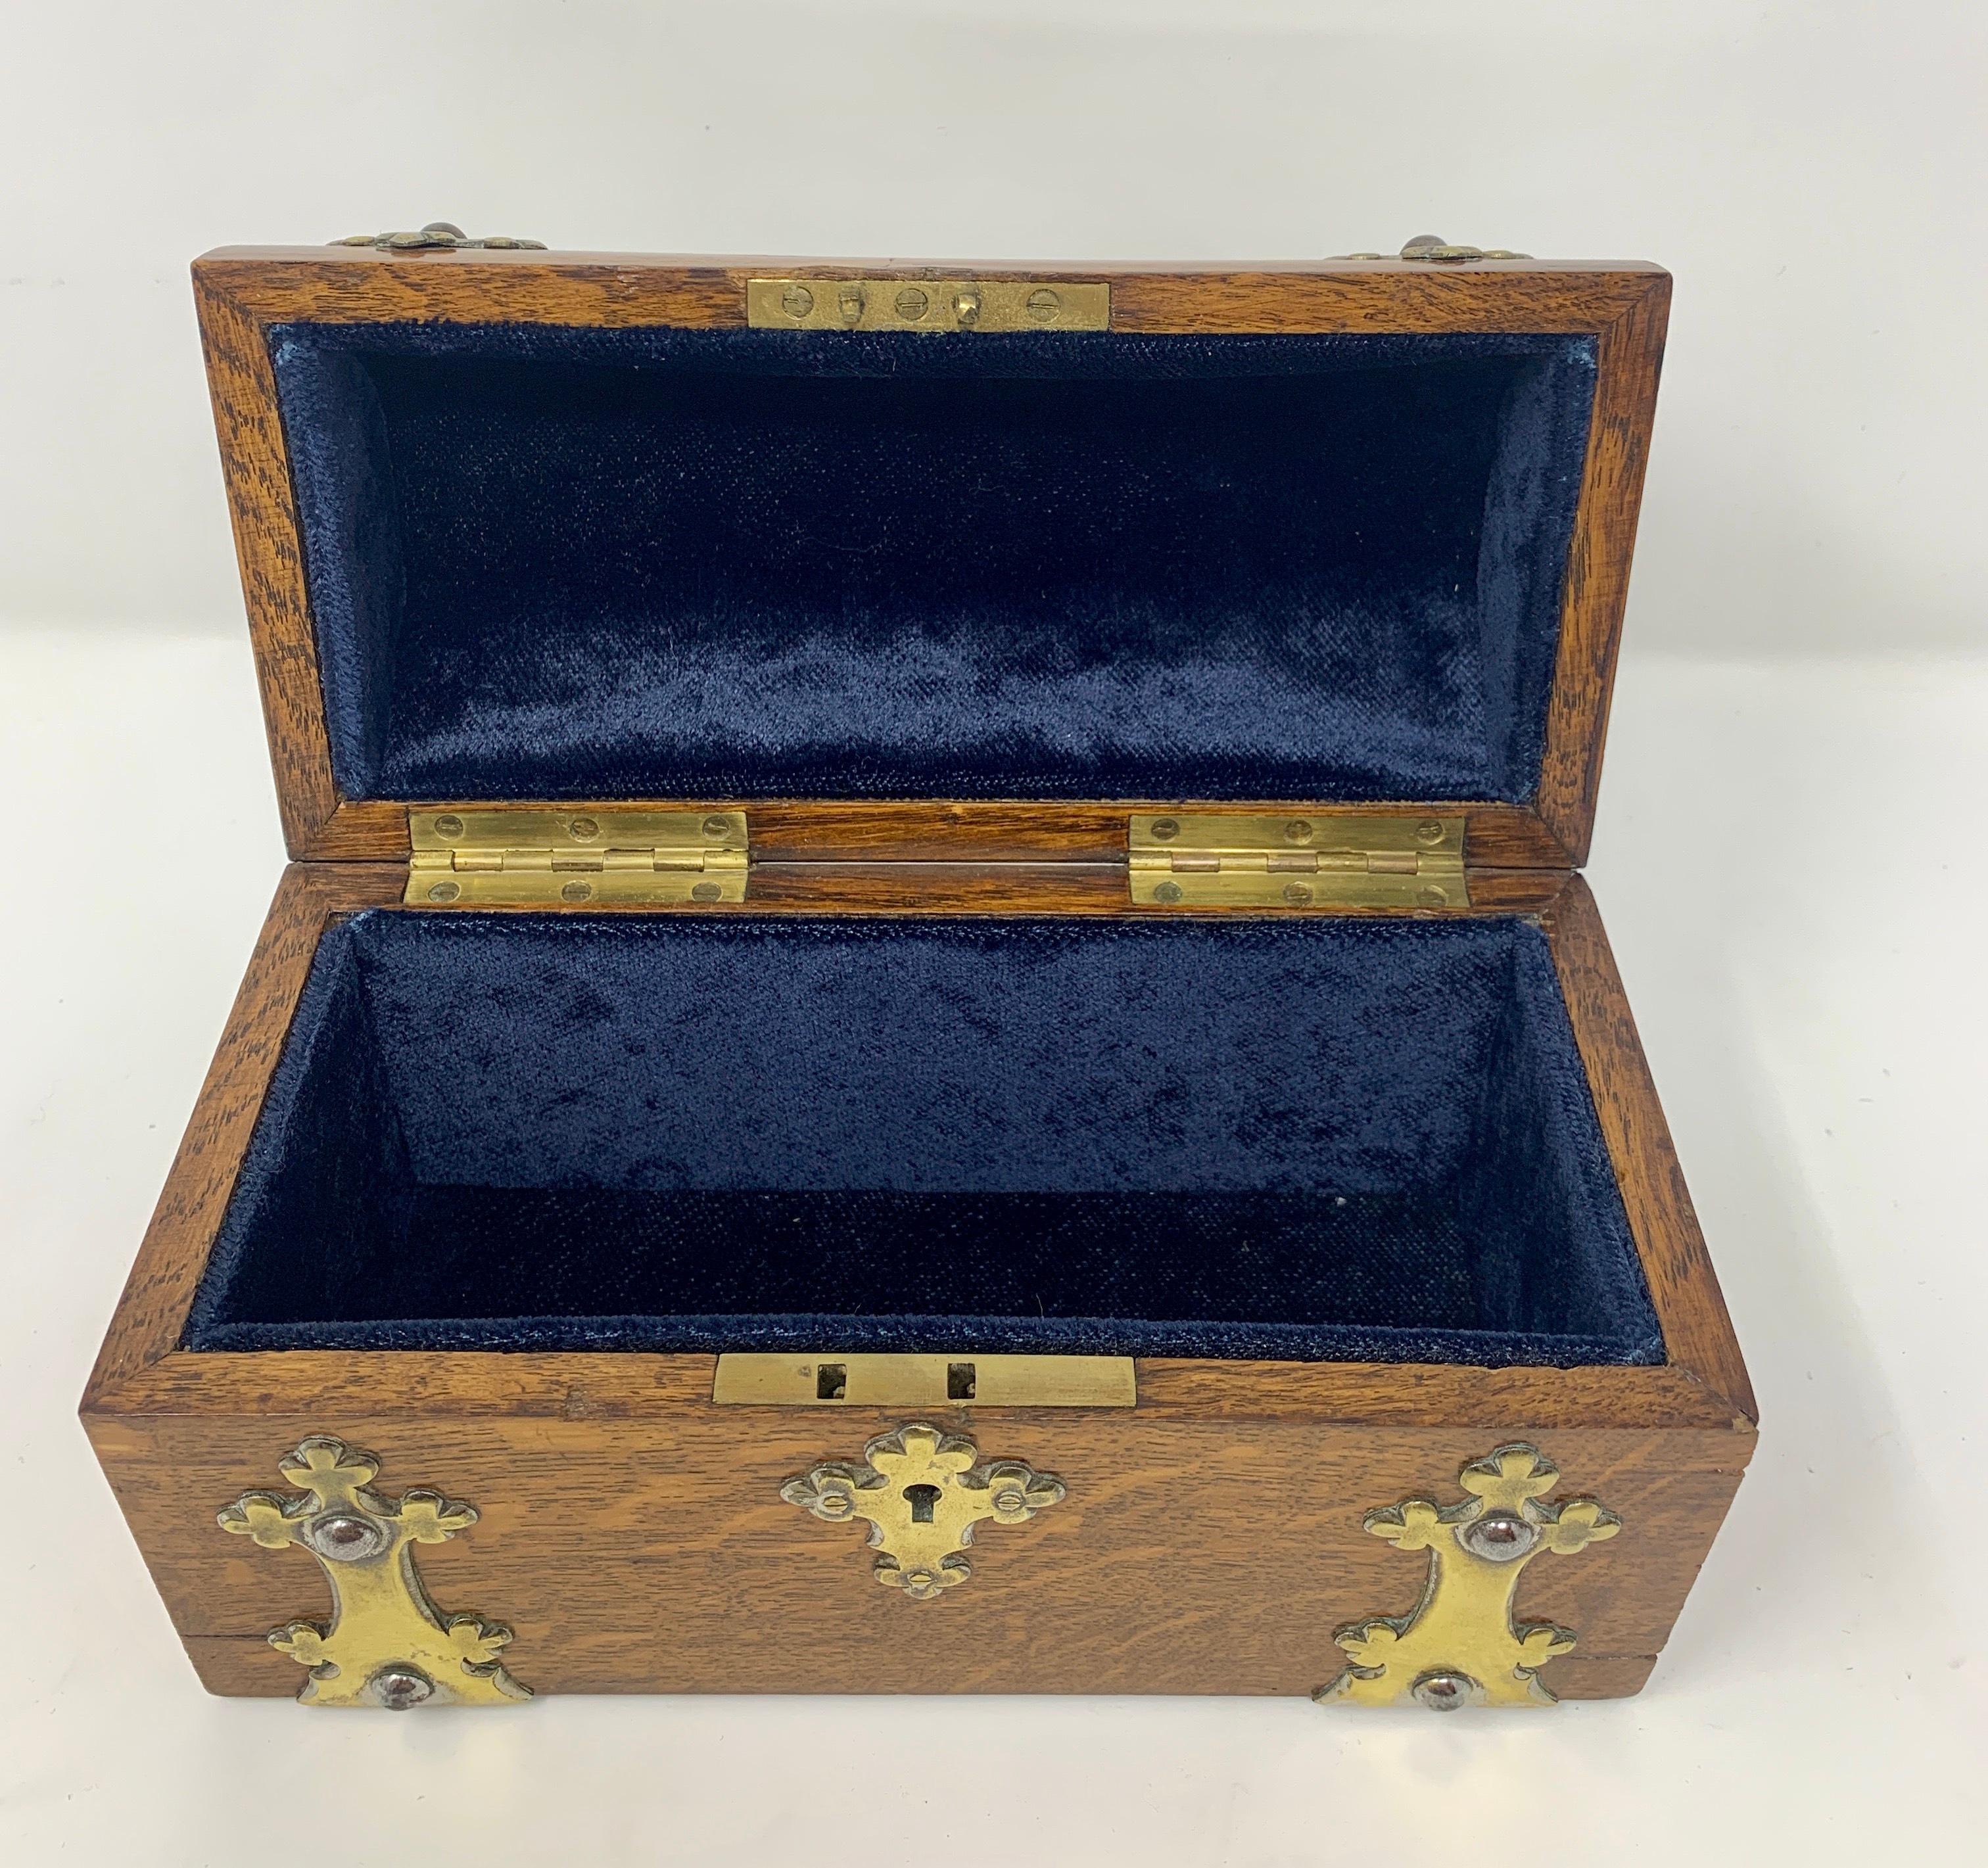 This box with brass mounts could be used as originally intended, for jewelry or watches, or for other valuables. It is quite handsome!.
 